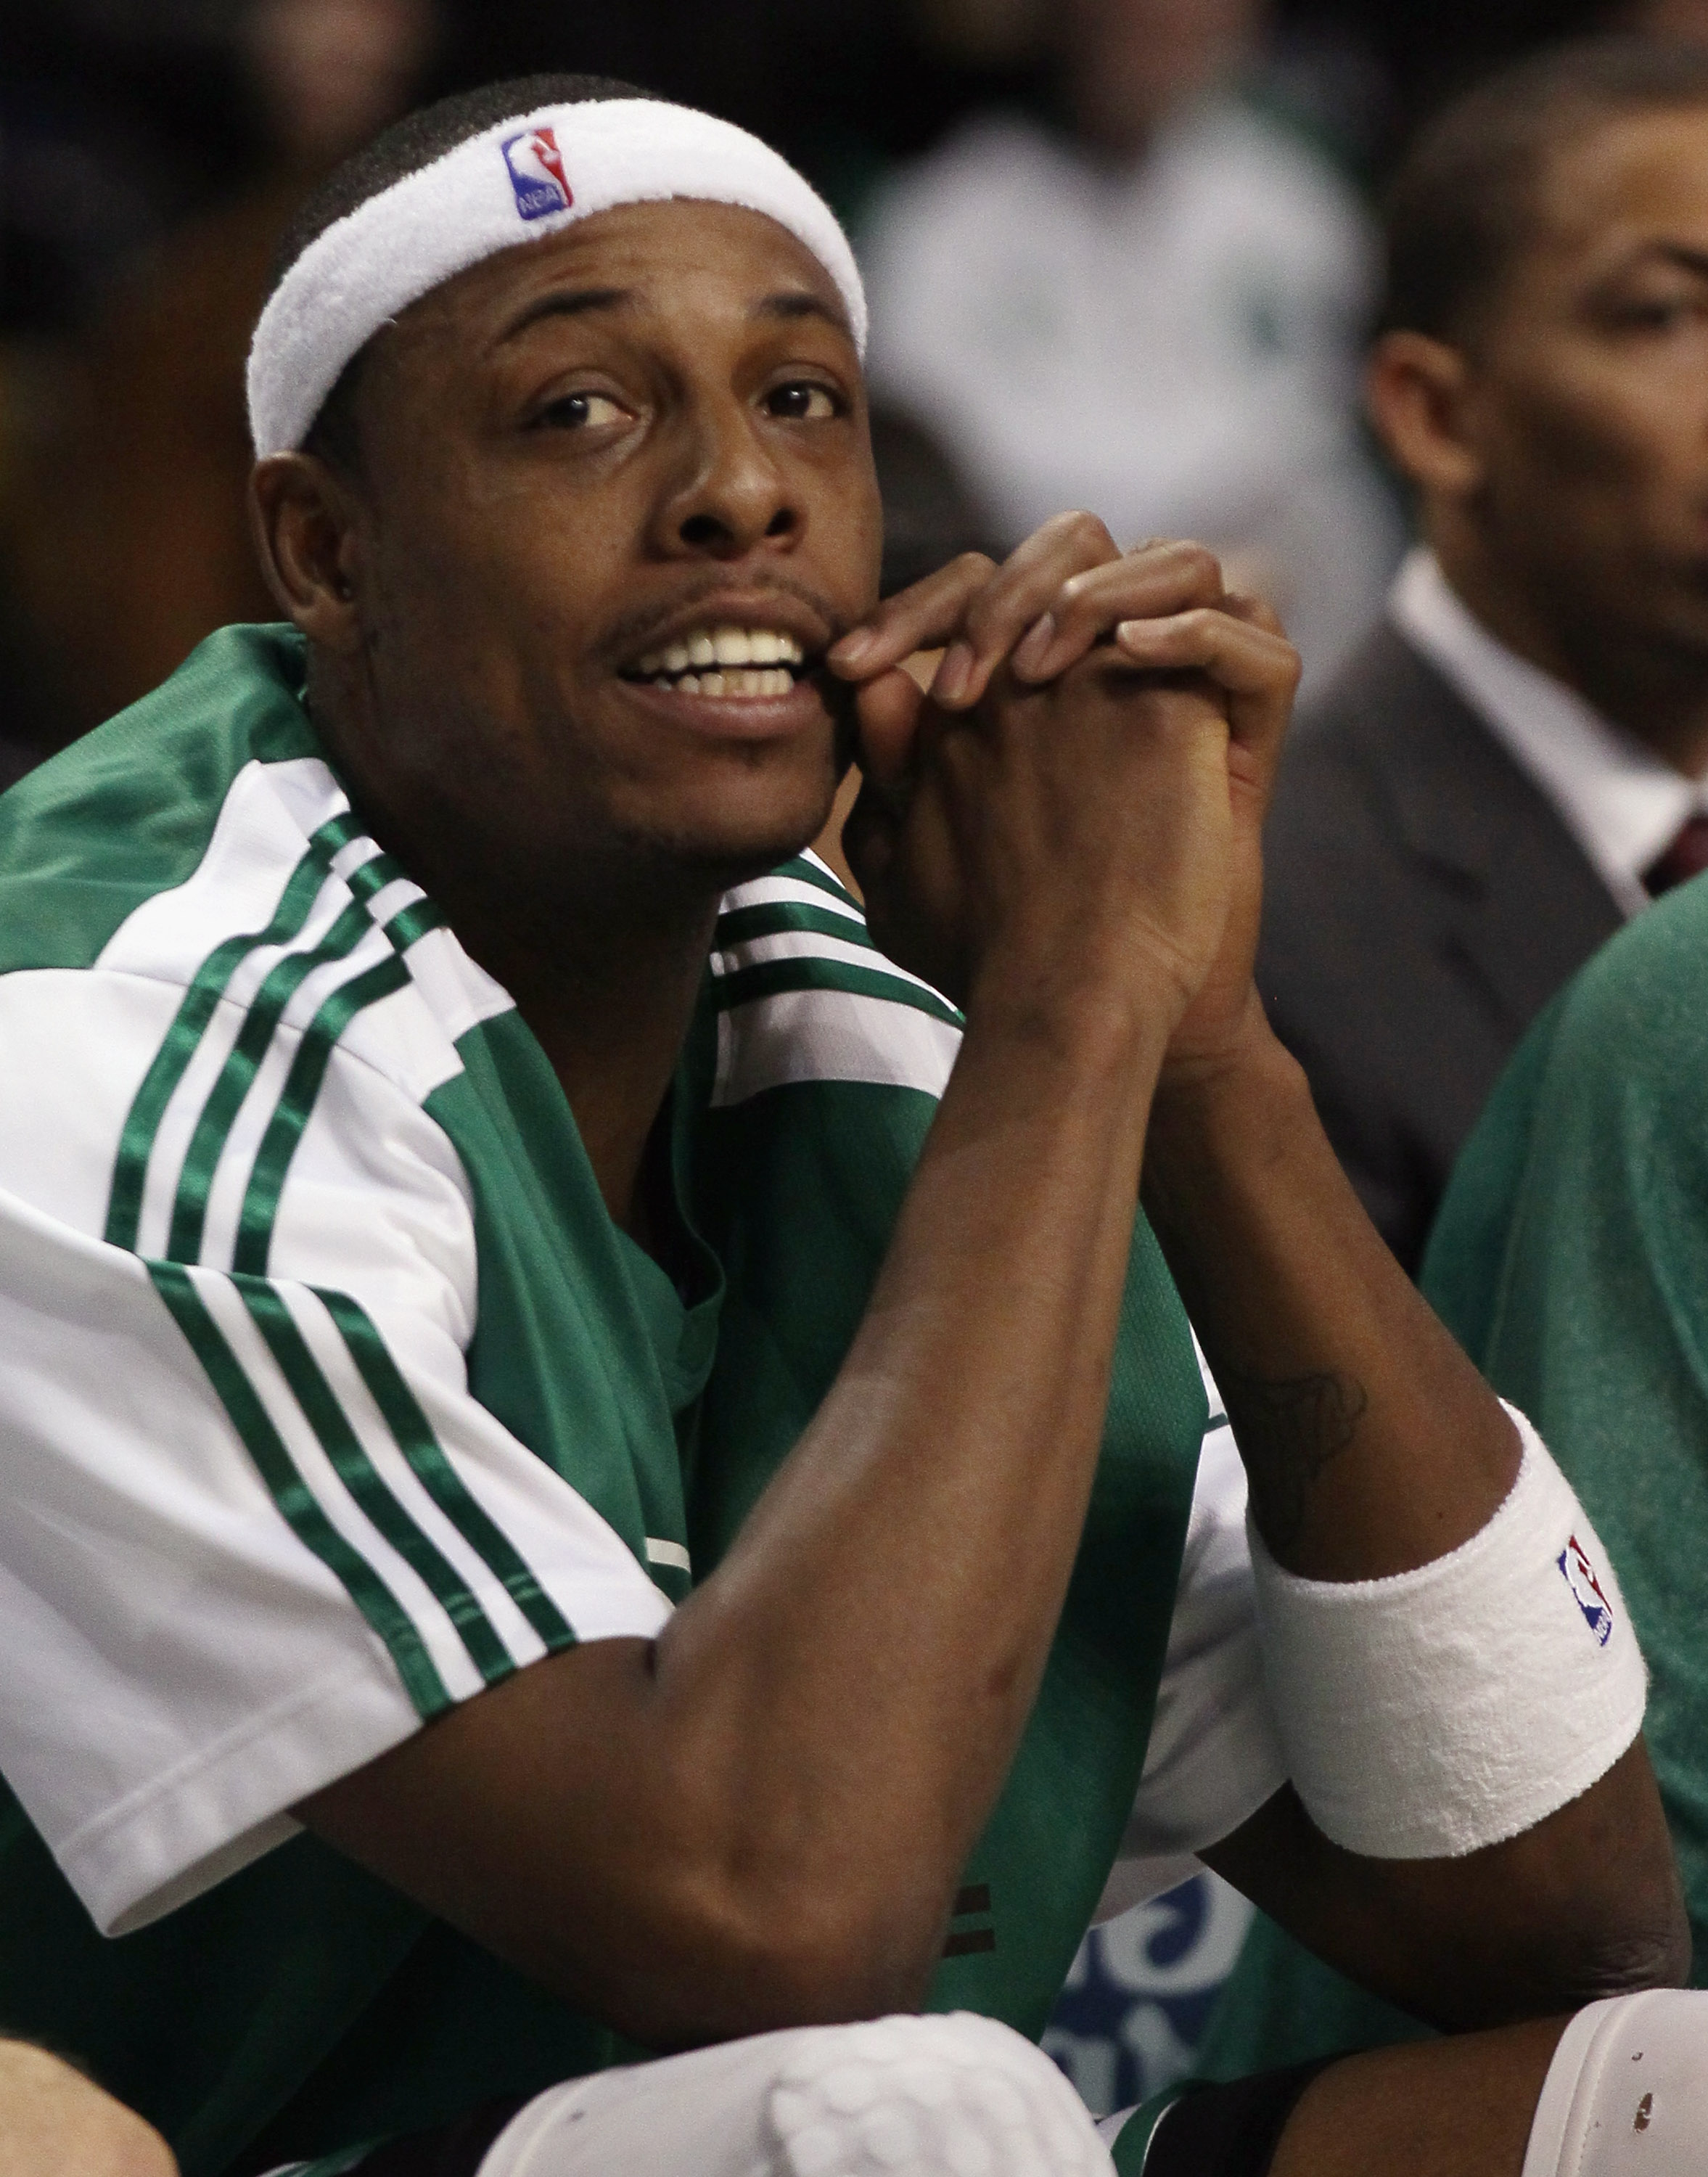 BOSTON, MA - DECEMBER 16:  Paul Pierce #34 of the Boston Celtics looks on from the bench in the first half against the Atlanta Hawks on December 16, 2010 at the TD Garden in Boston, Massachusetts. NOTE TO USER: User expressly acknowledges and agrees that,